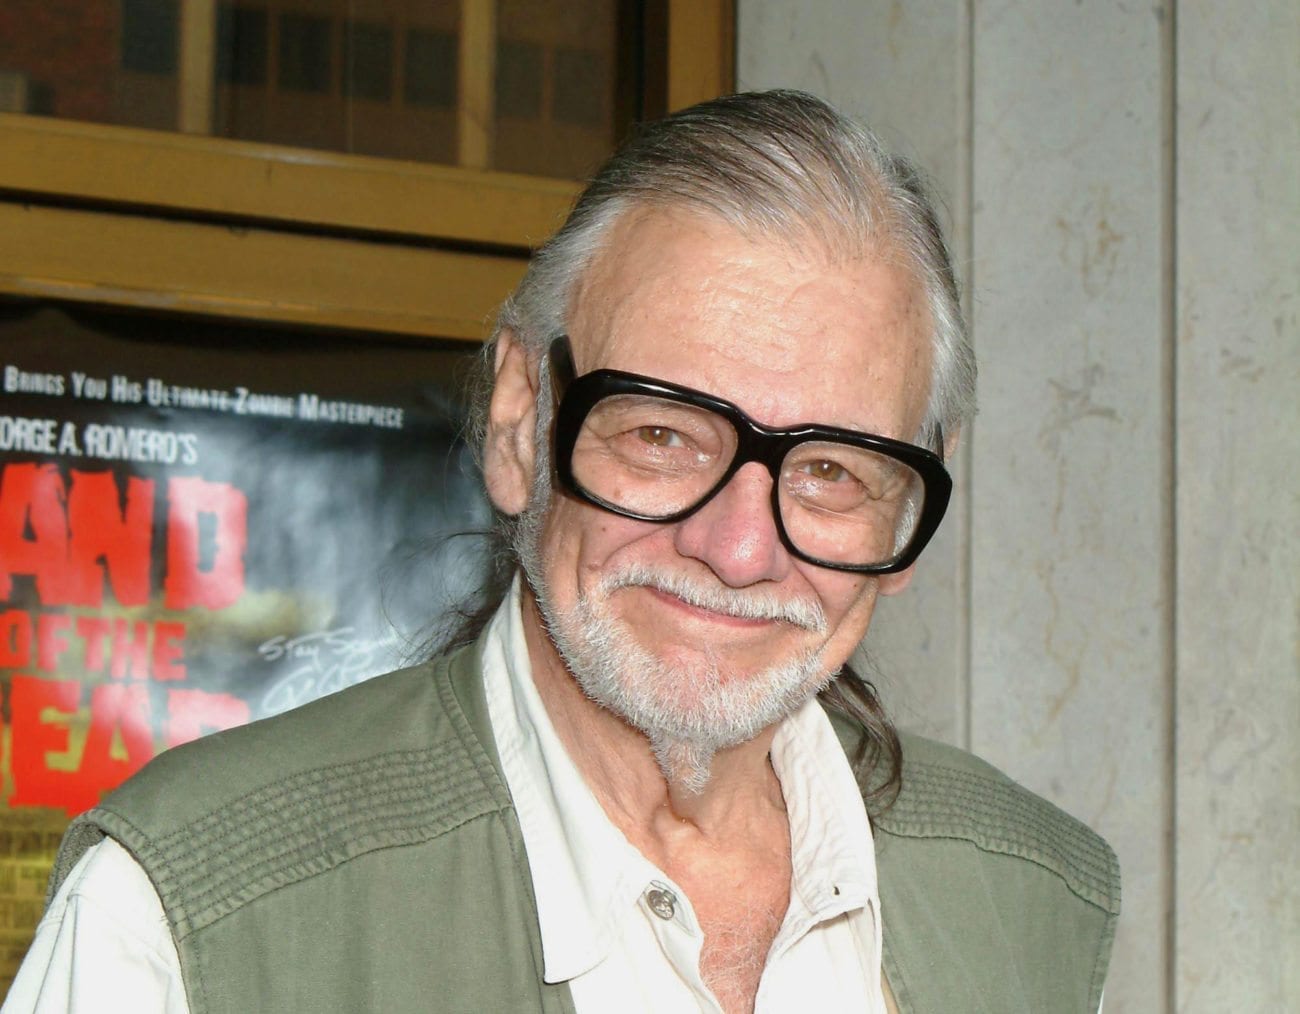 Acclaimed director of 'Night of the Living Dead' and hero of horror, George Romero, has died at 77 after a short but aggressive battle with cancer.